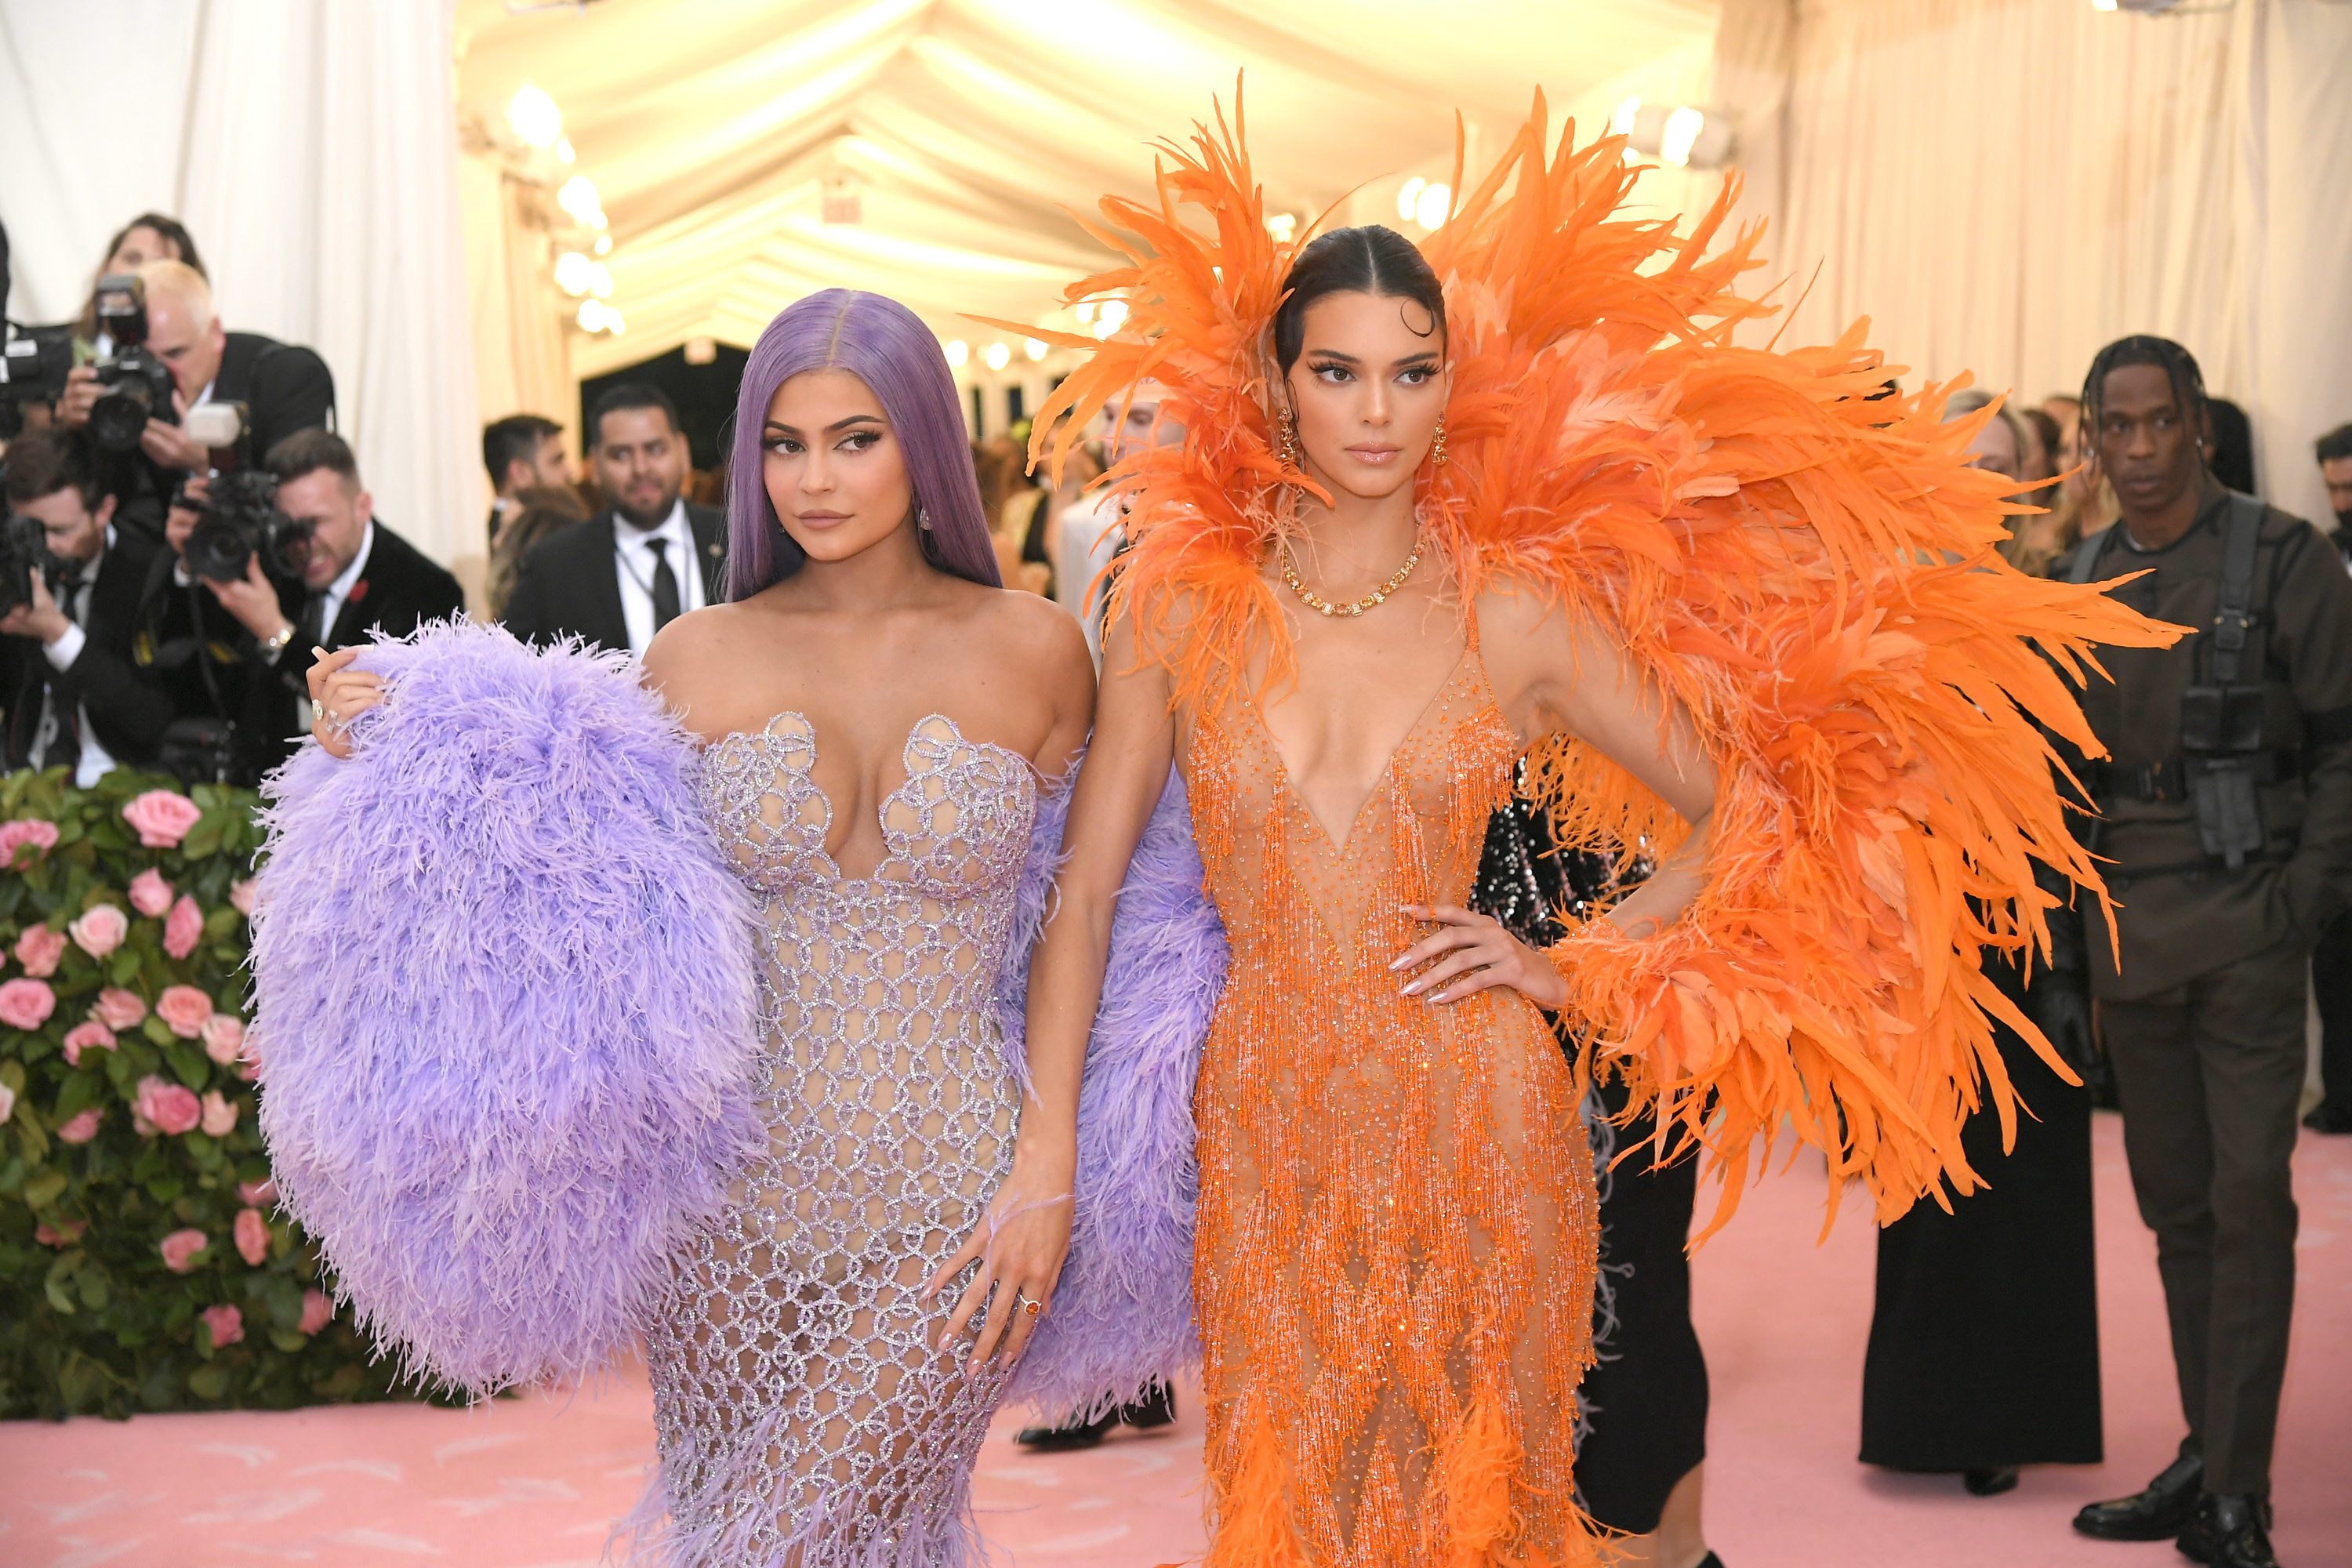 Kylie and Kendall Jenner wear ostentatious outfits at the Met Gala